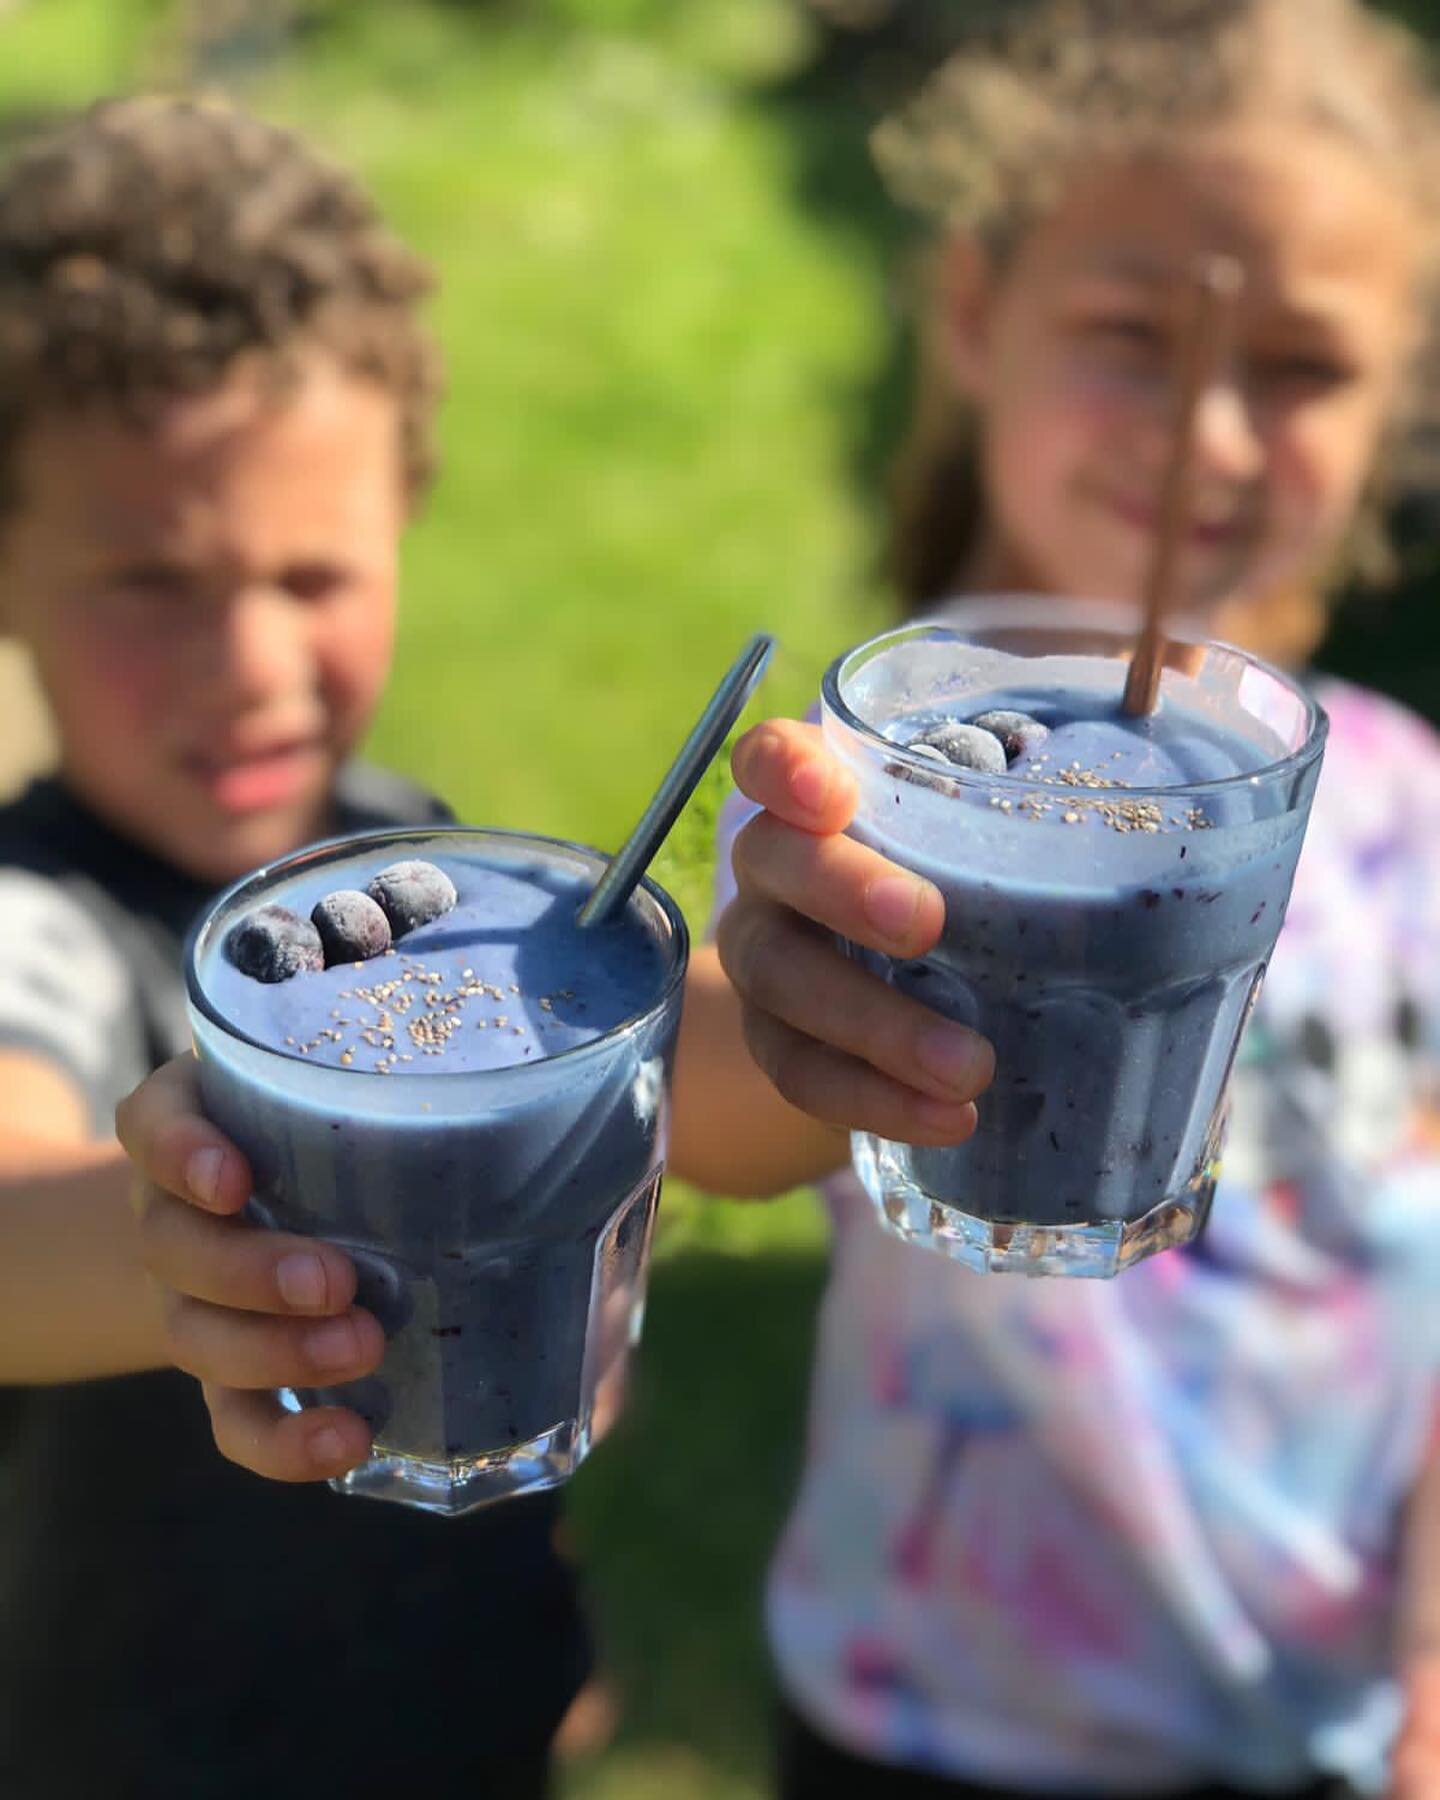 Hope you are all enjoying the Sun at last! The kids came home after a hot day at school craving something cold and sweet. So I gave this blue spirulina iced smoothies a go! A handful of frozen fruit, blue spirulina from @veautybox blitz in the blende